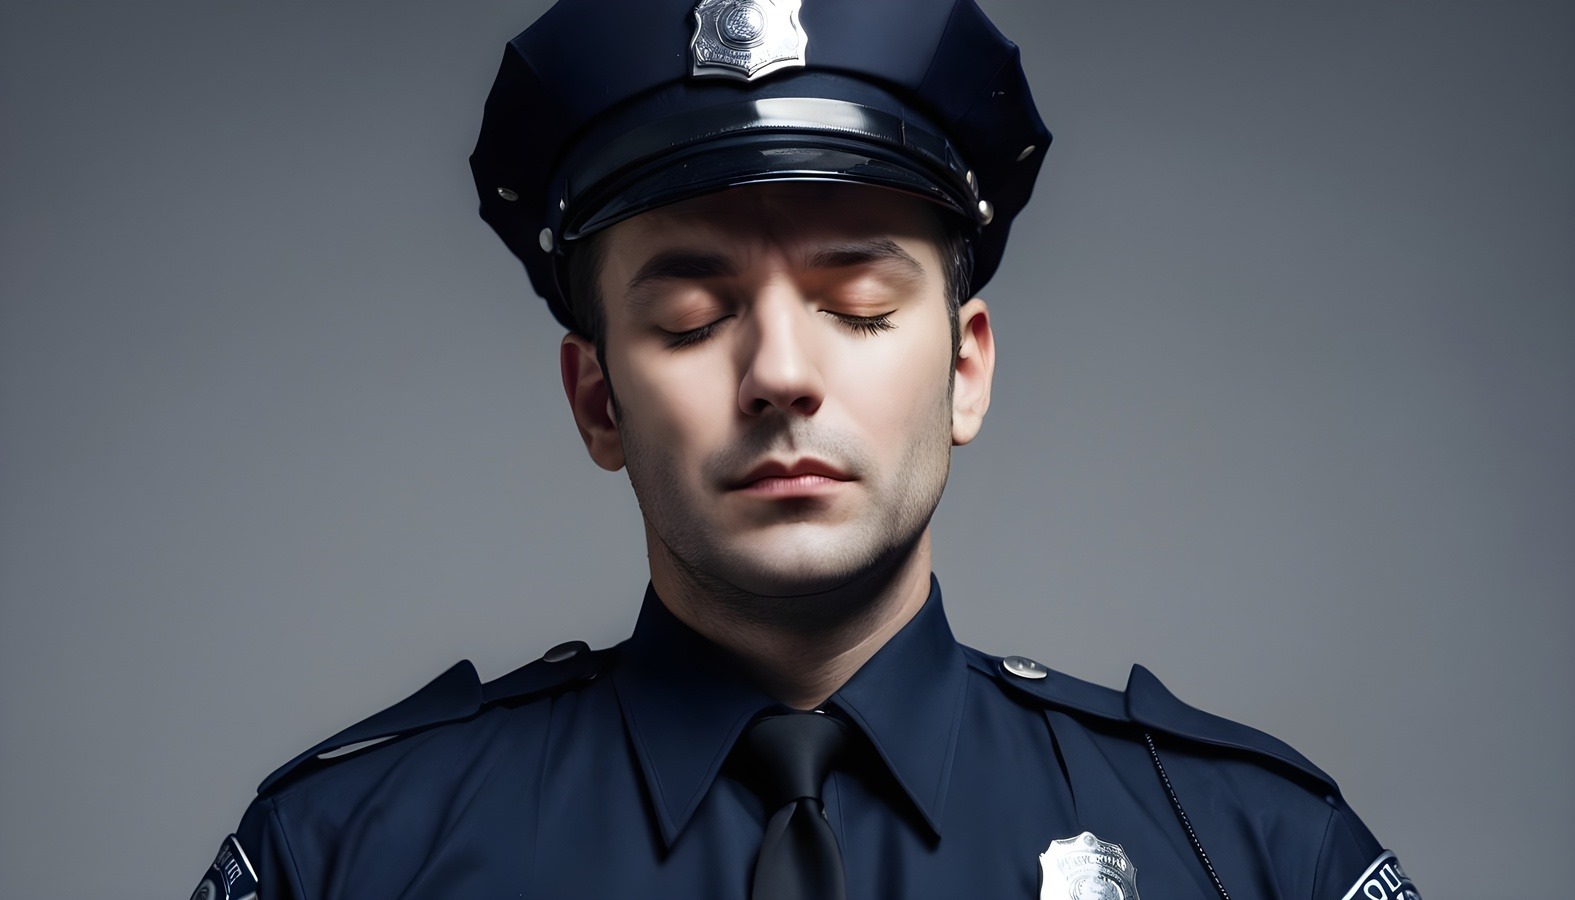 man-dressed-in-police-uniform-with-closed-eyes